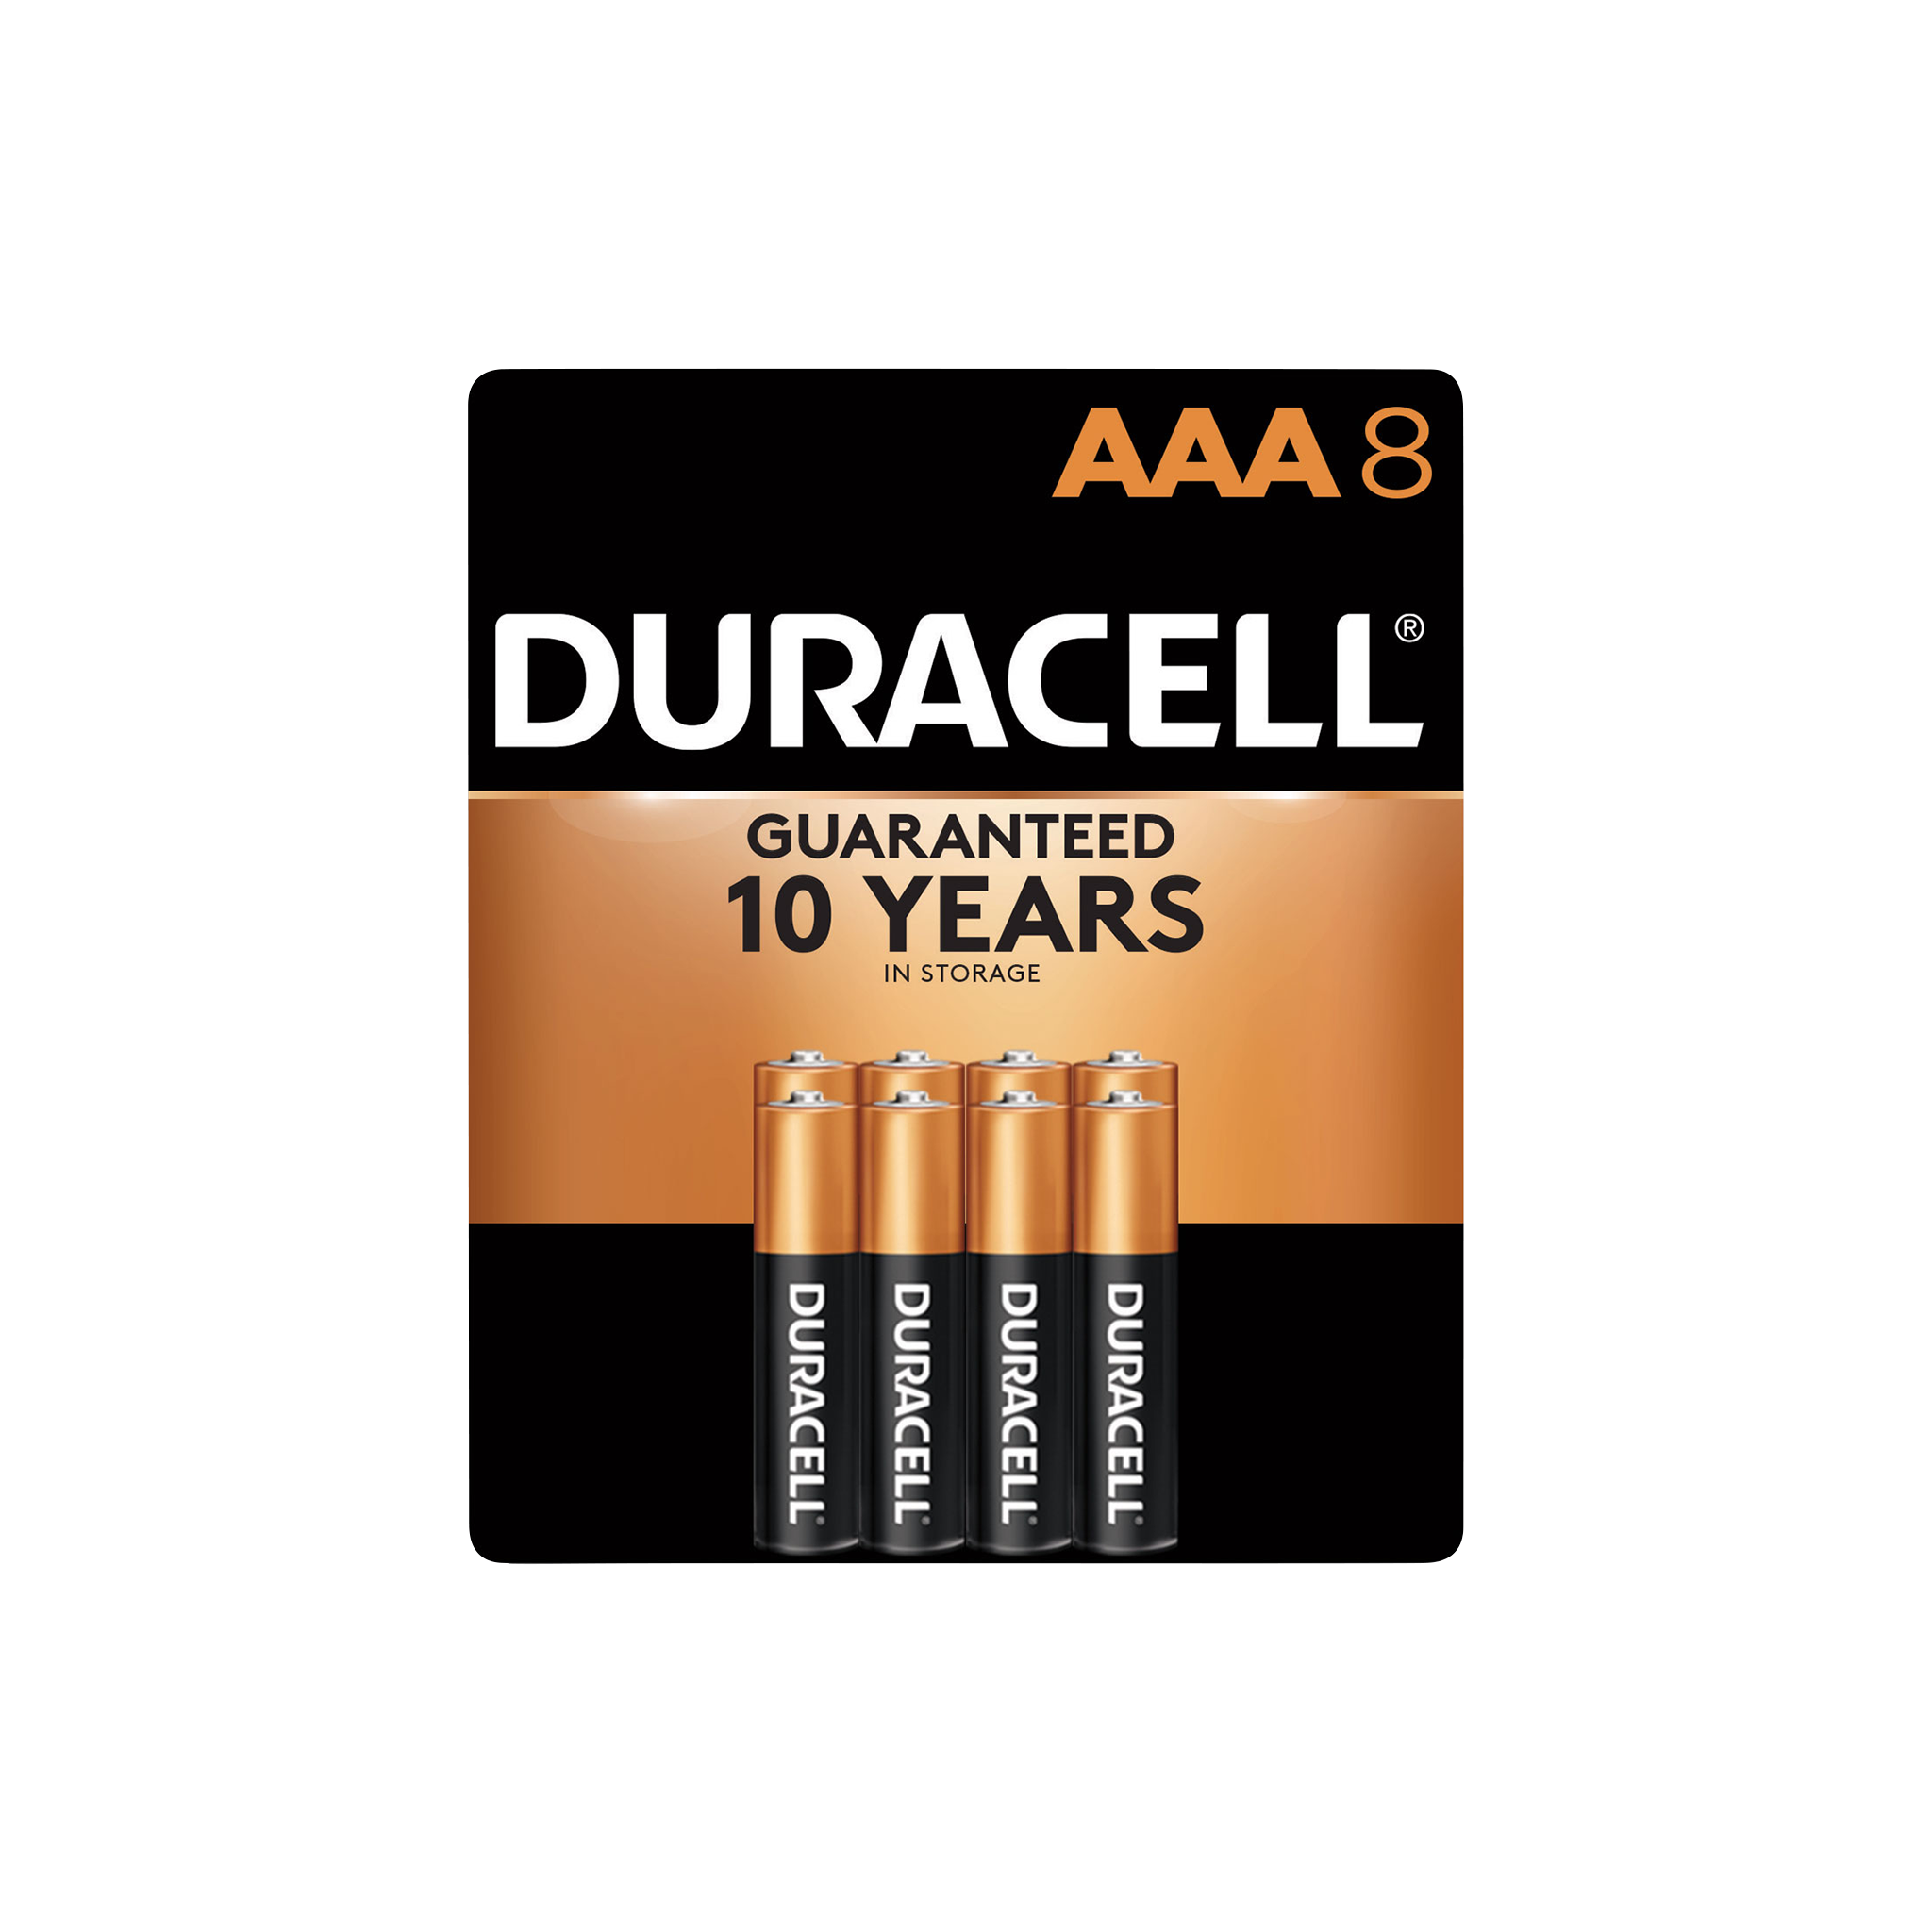 Duracell AAA Batteries - 8 Pack